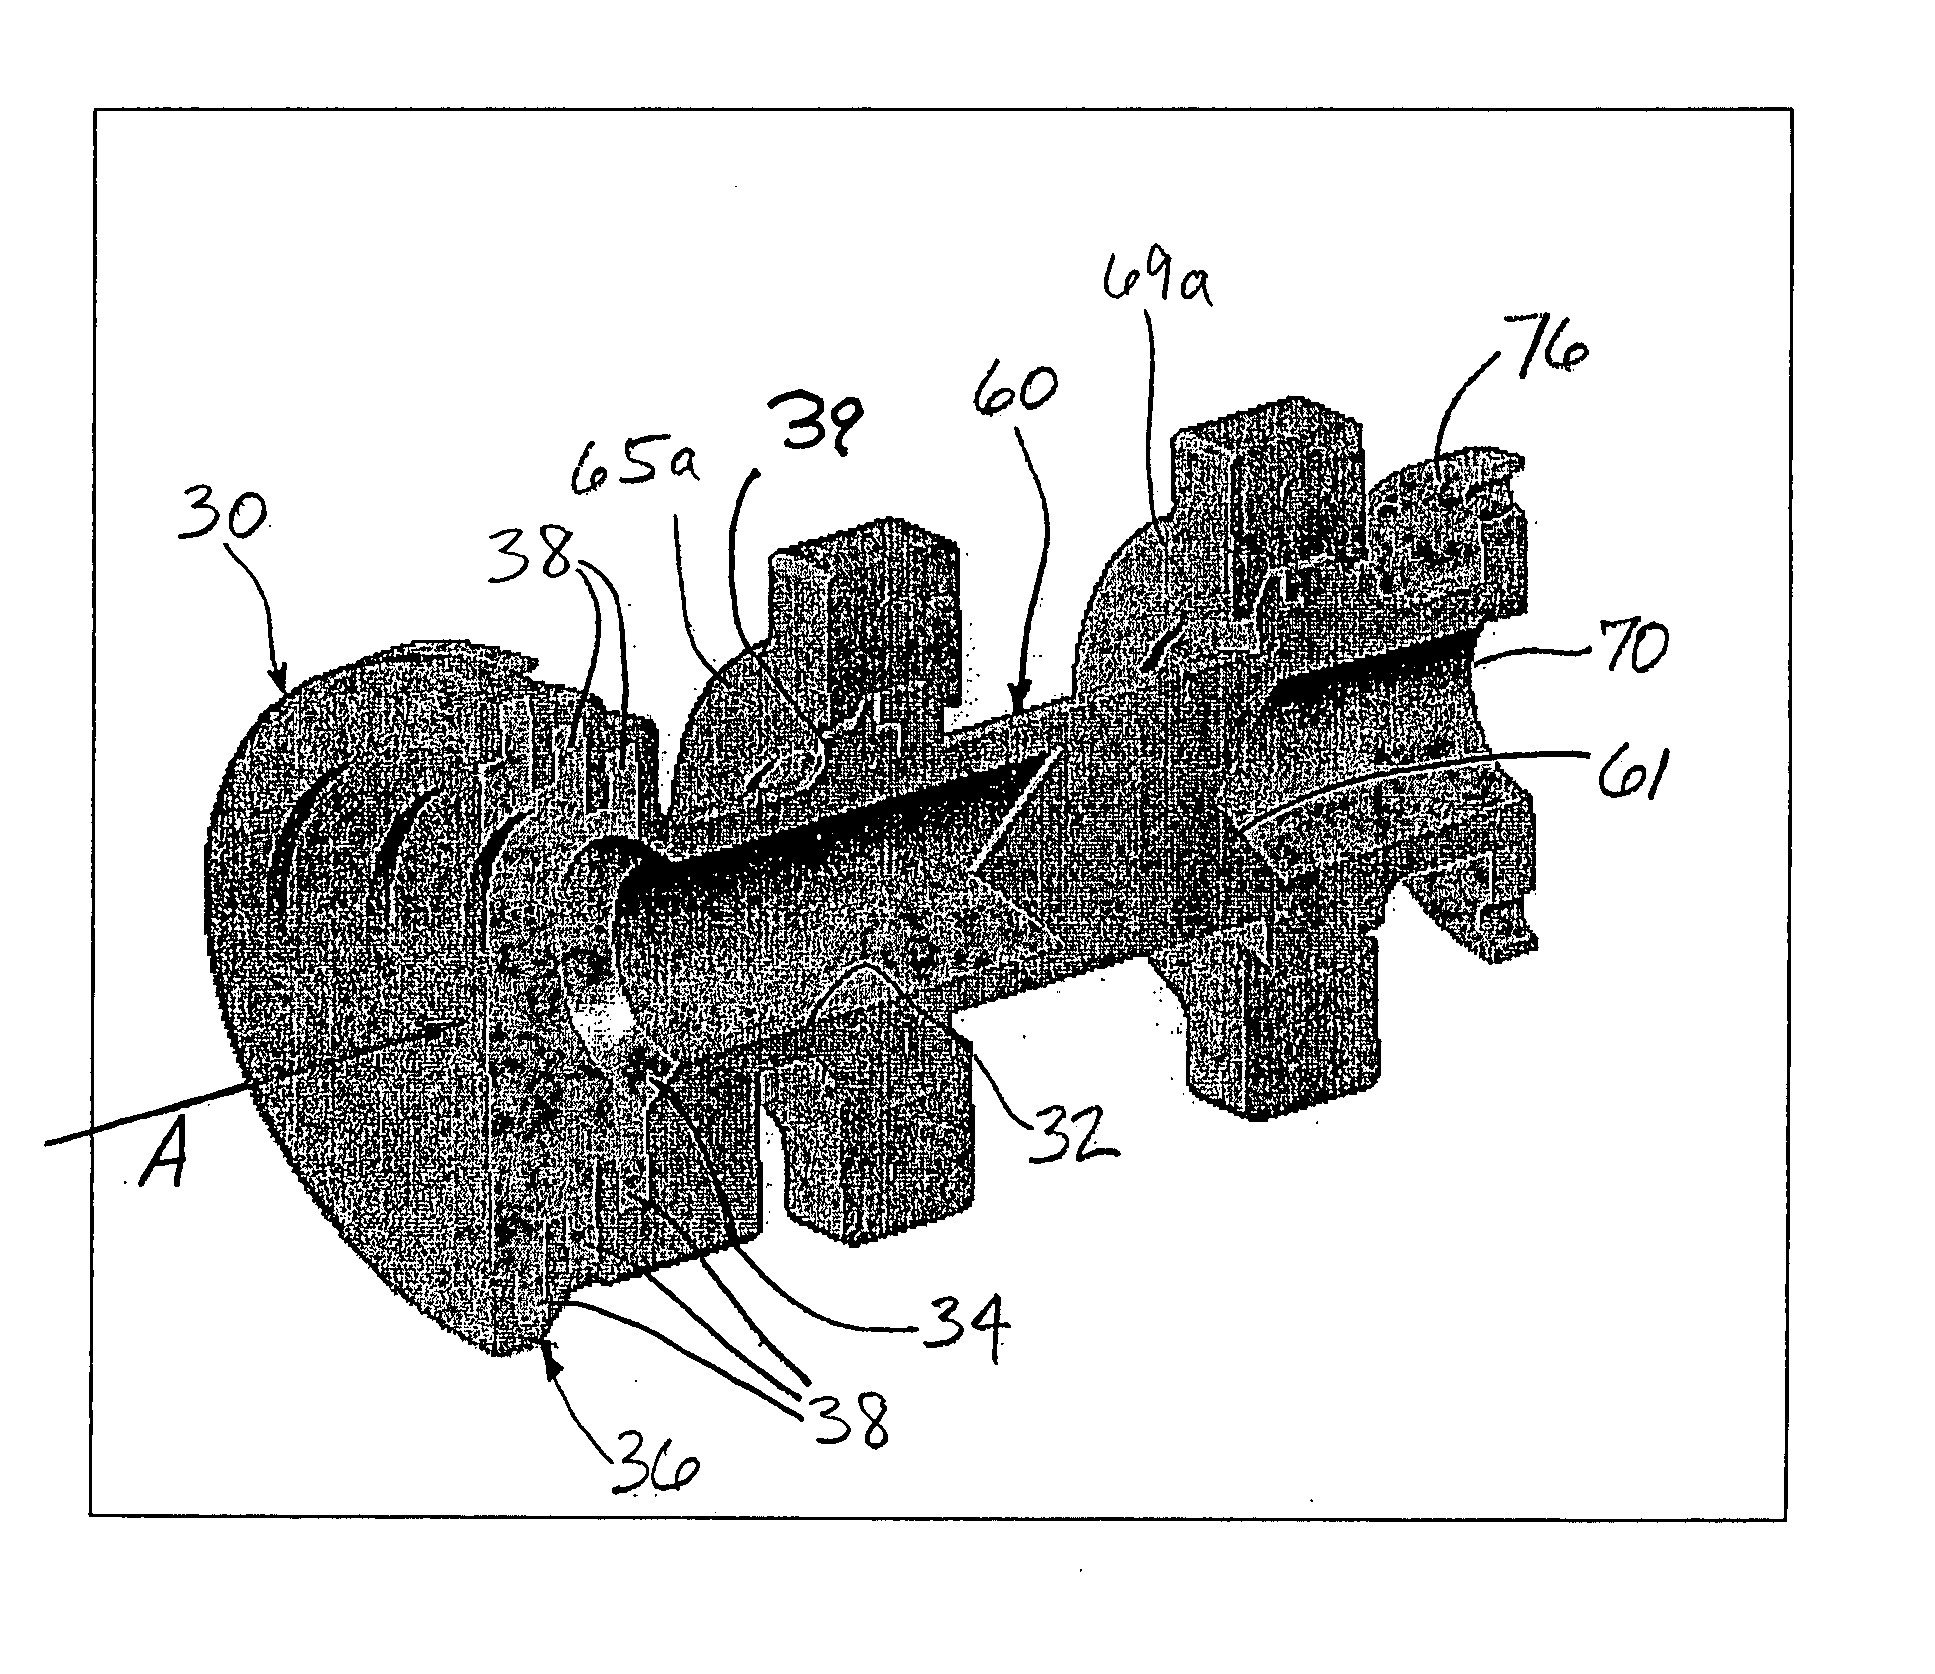 Feed assembly for multi-beam antenna with non-circular reflector, and such an assembly that is field-switchable between linear and circular polarization modes